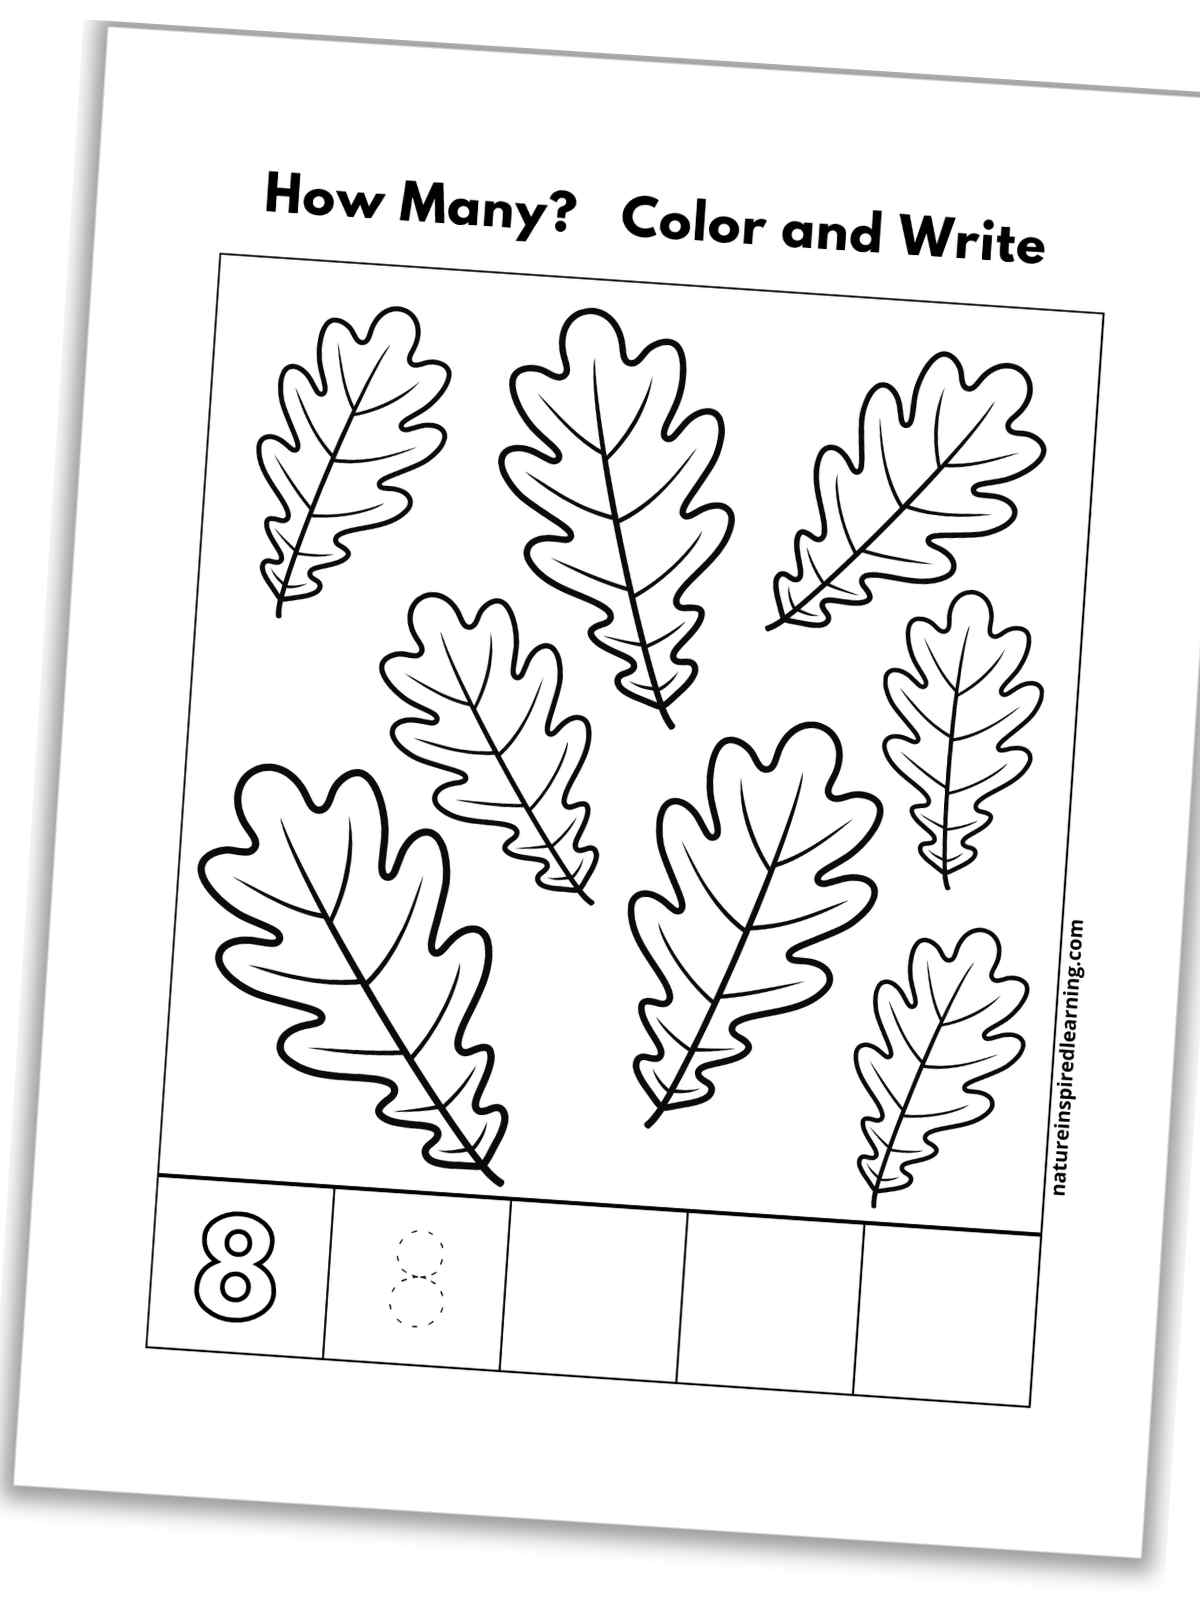 black and white number eight worksheet with leaves, outline of number 8, a traceable 8, and blank boxes slanted with a drop shadow